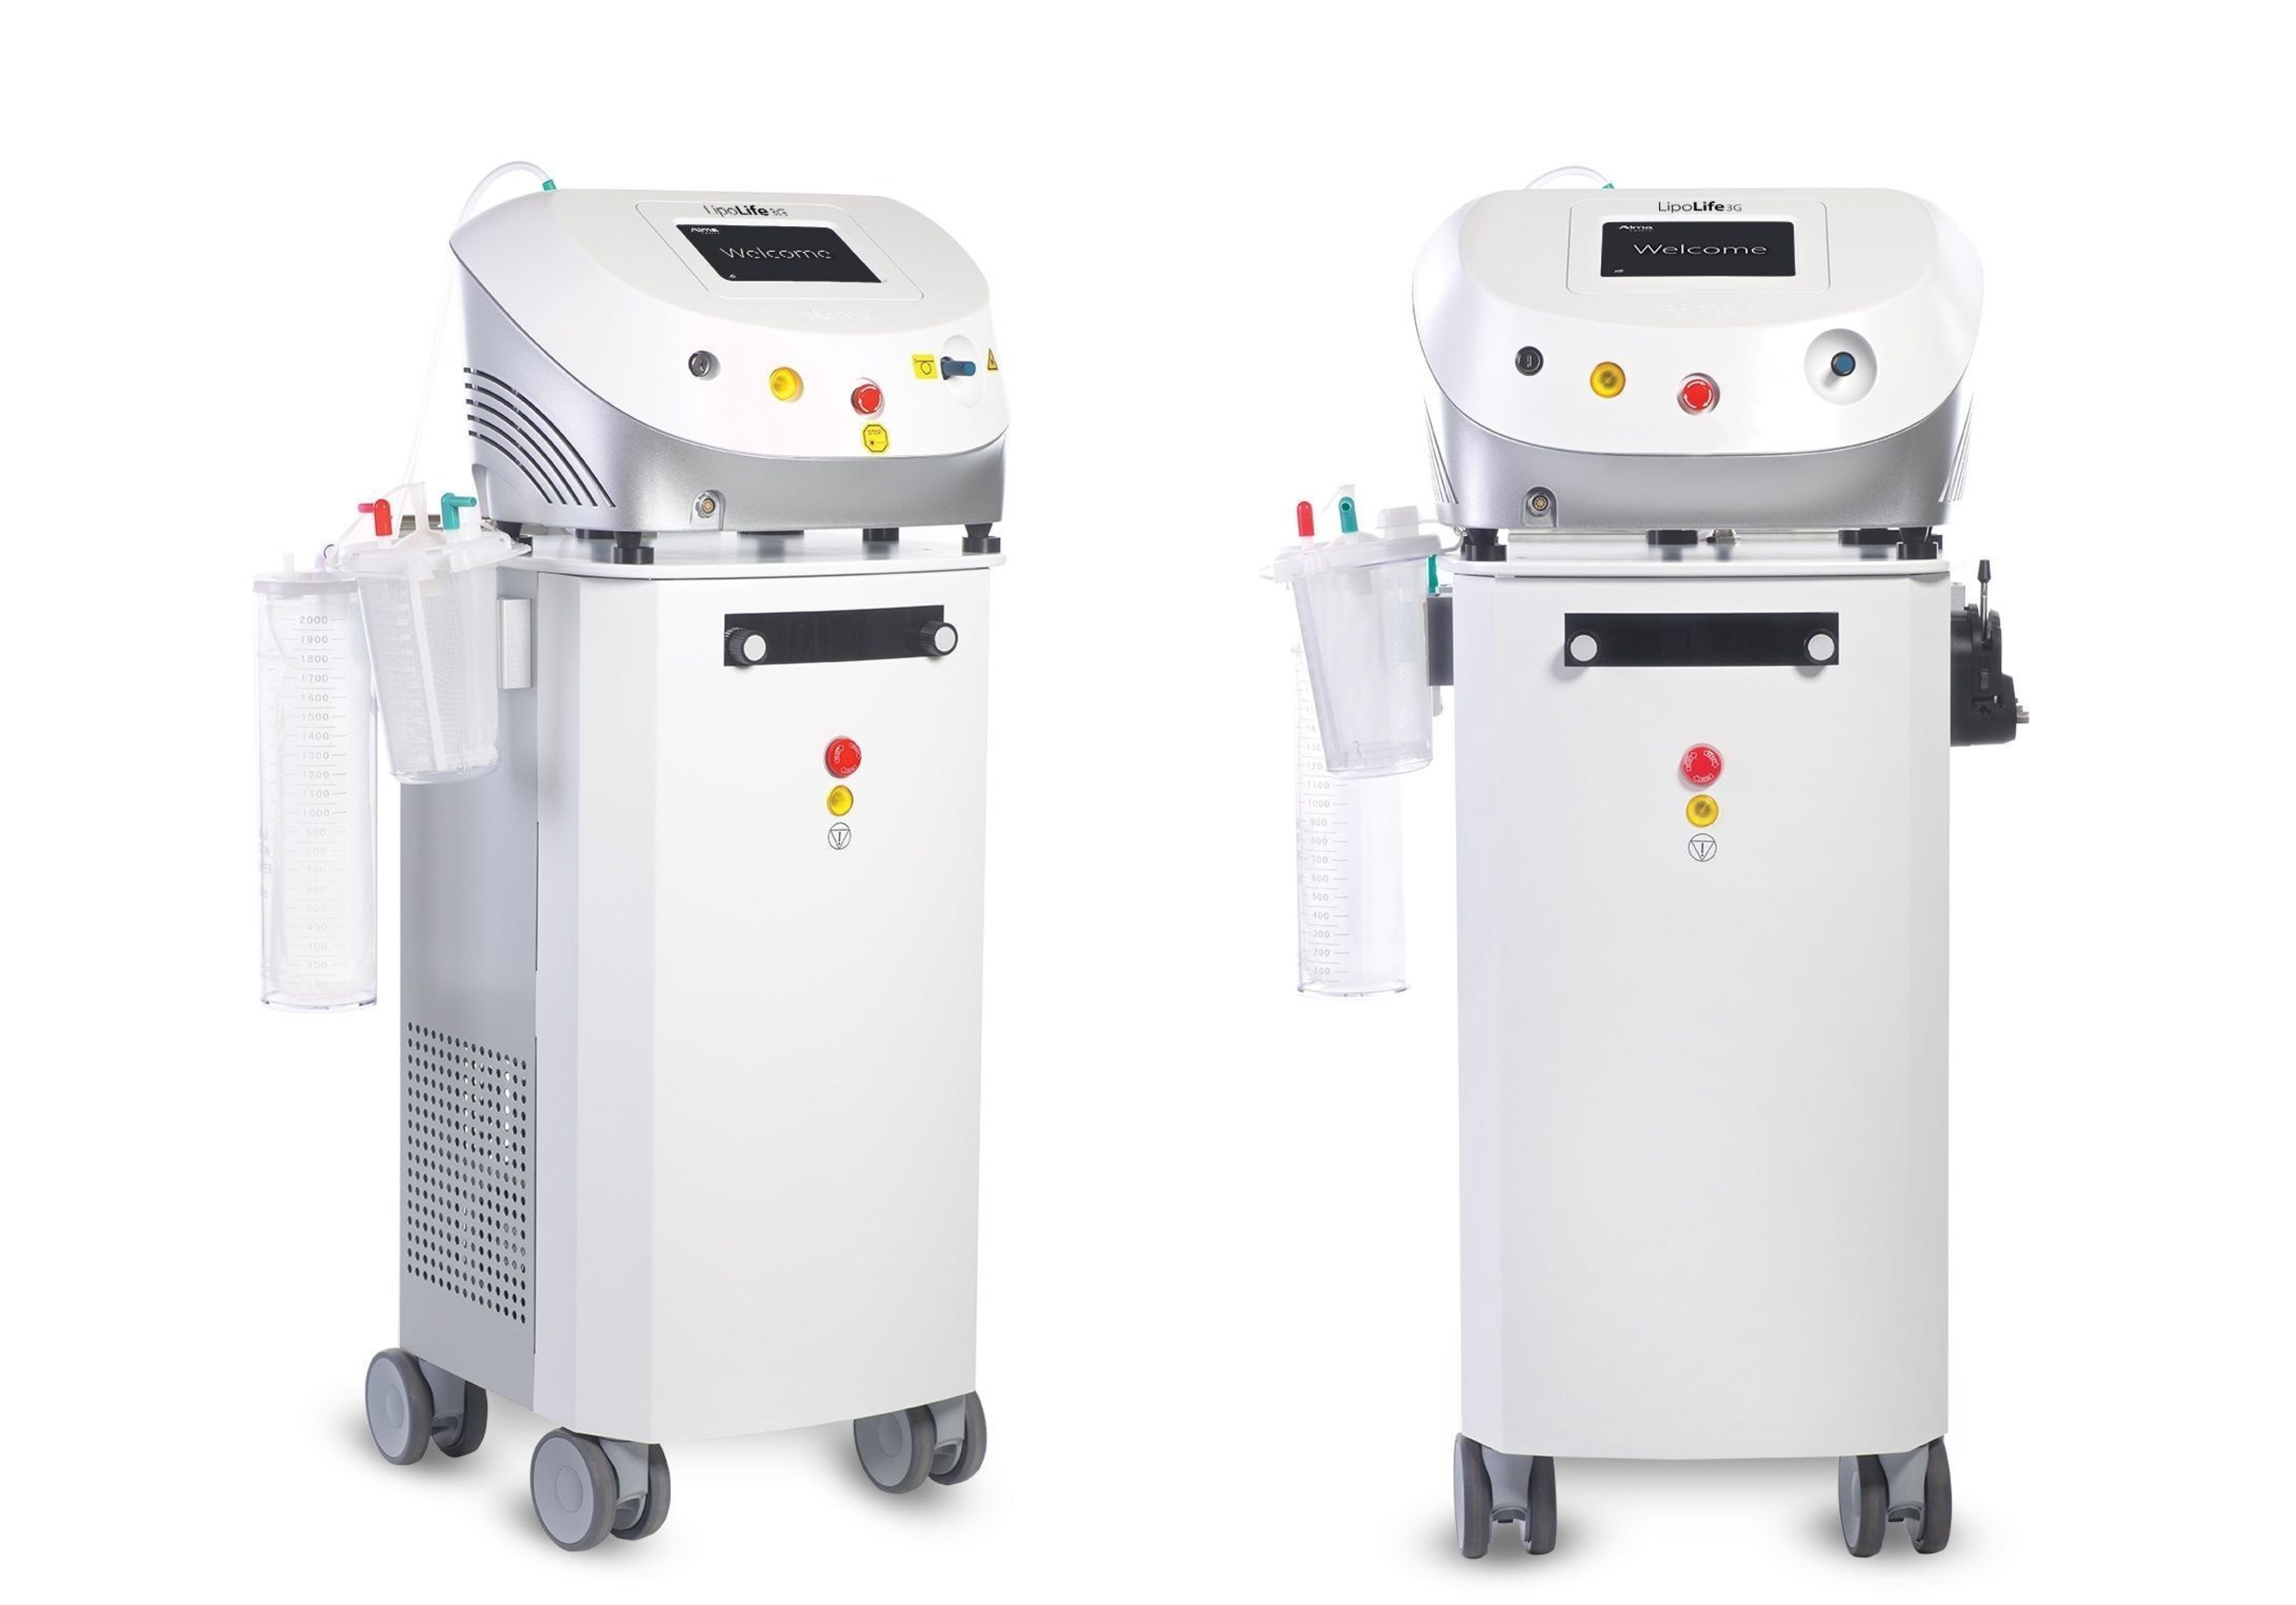 Alma LipoLife 3G, the Complete Solution for Liposuction, Skin Tightening & Fat Grafting. The first integrated solution of its kind combining multiple modalities in a compact, portable and neatly organized system (PRNewsFoto/Alma Lasers)